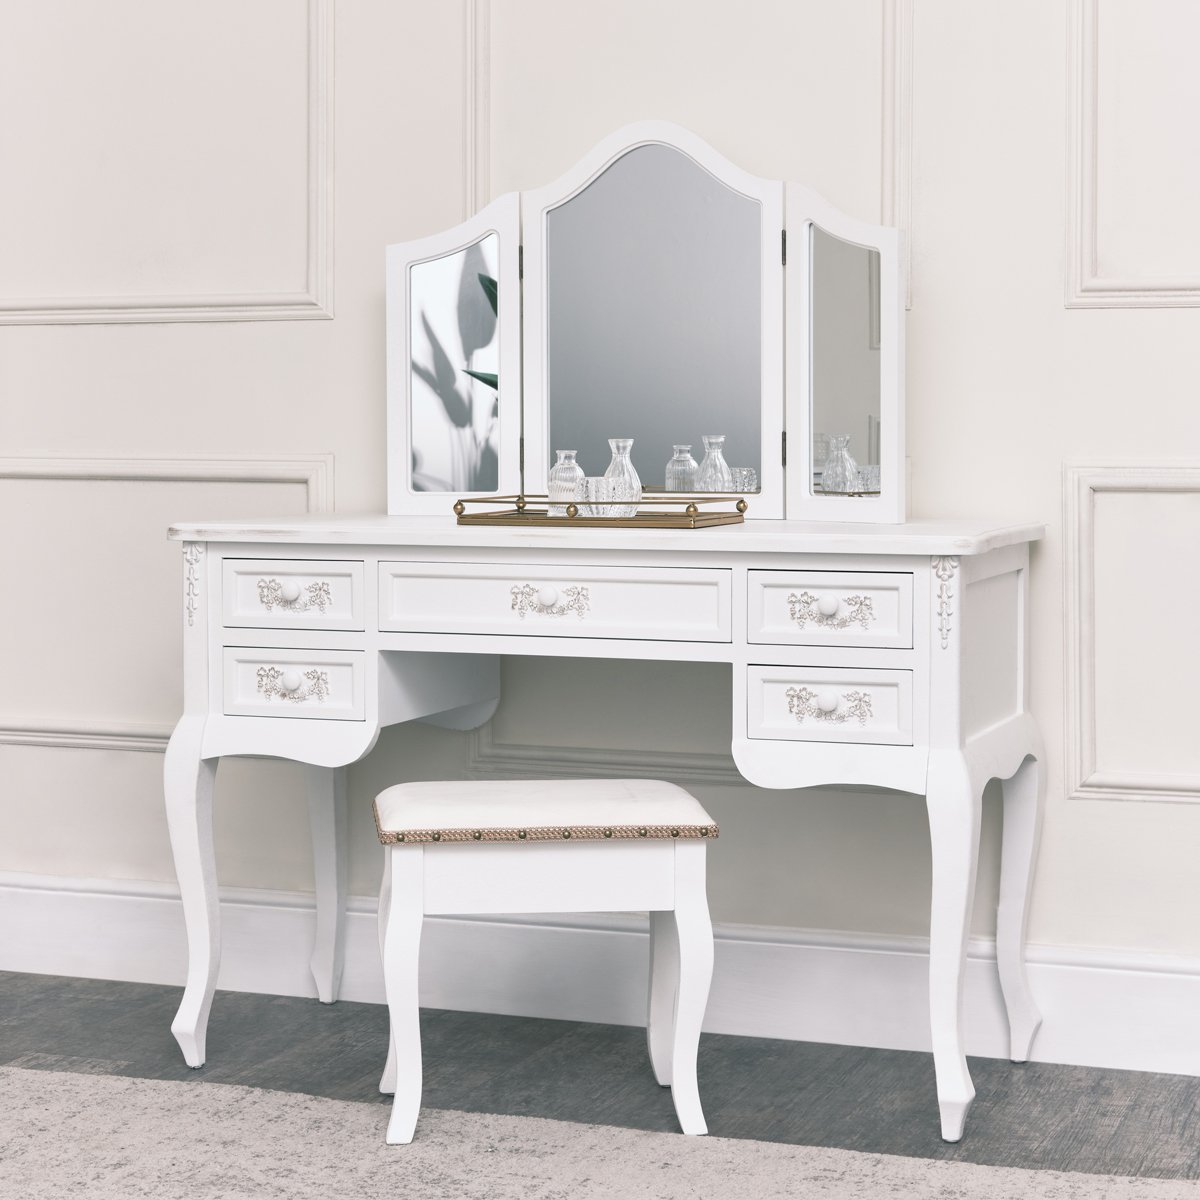 Antique White Closet, Dressing Table Set, Chest of Drawers & Pair of Bedside Tables - Pays Blanc Range